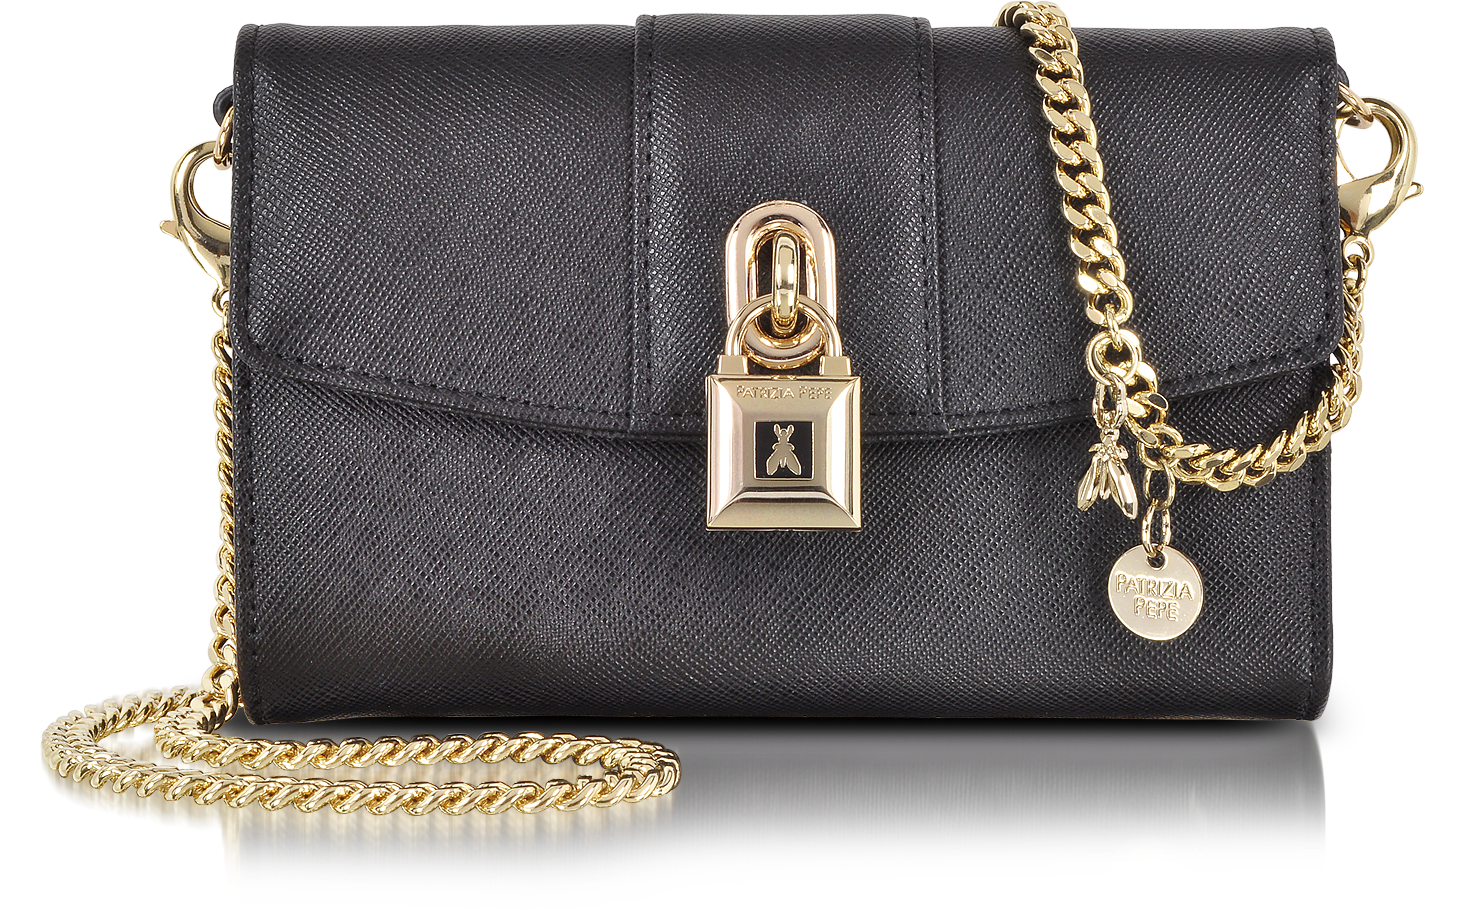 Patrizia Pepe Mini Clutch Bag in Leather with Shoulder Strap at FORZIERI